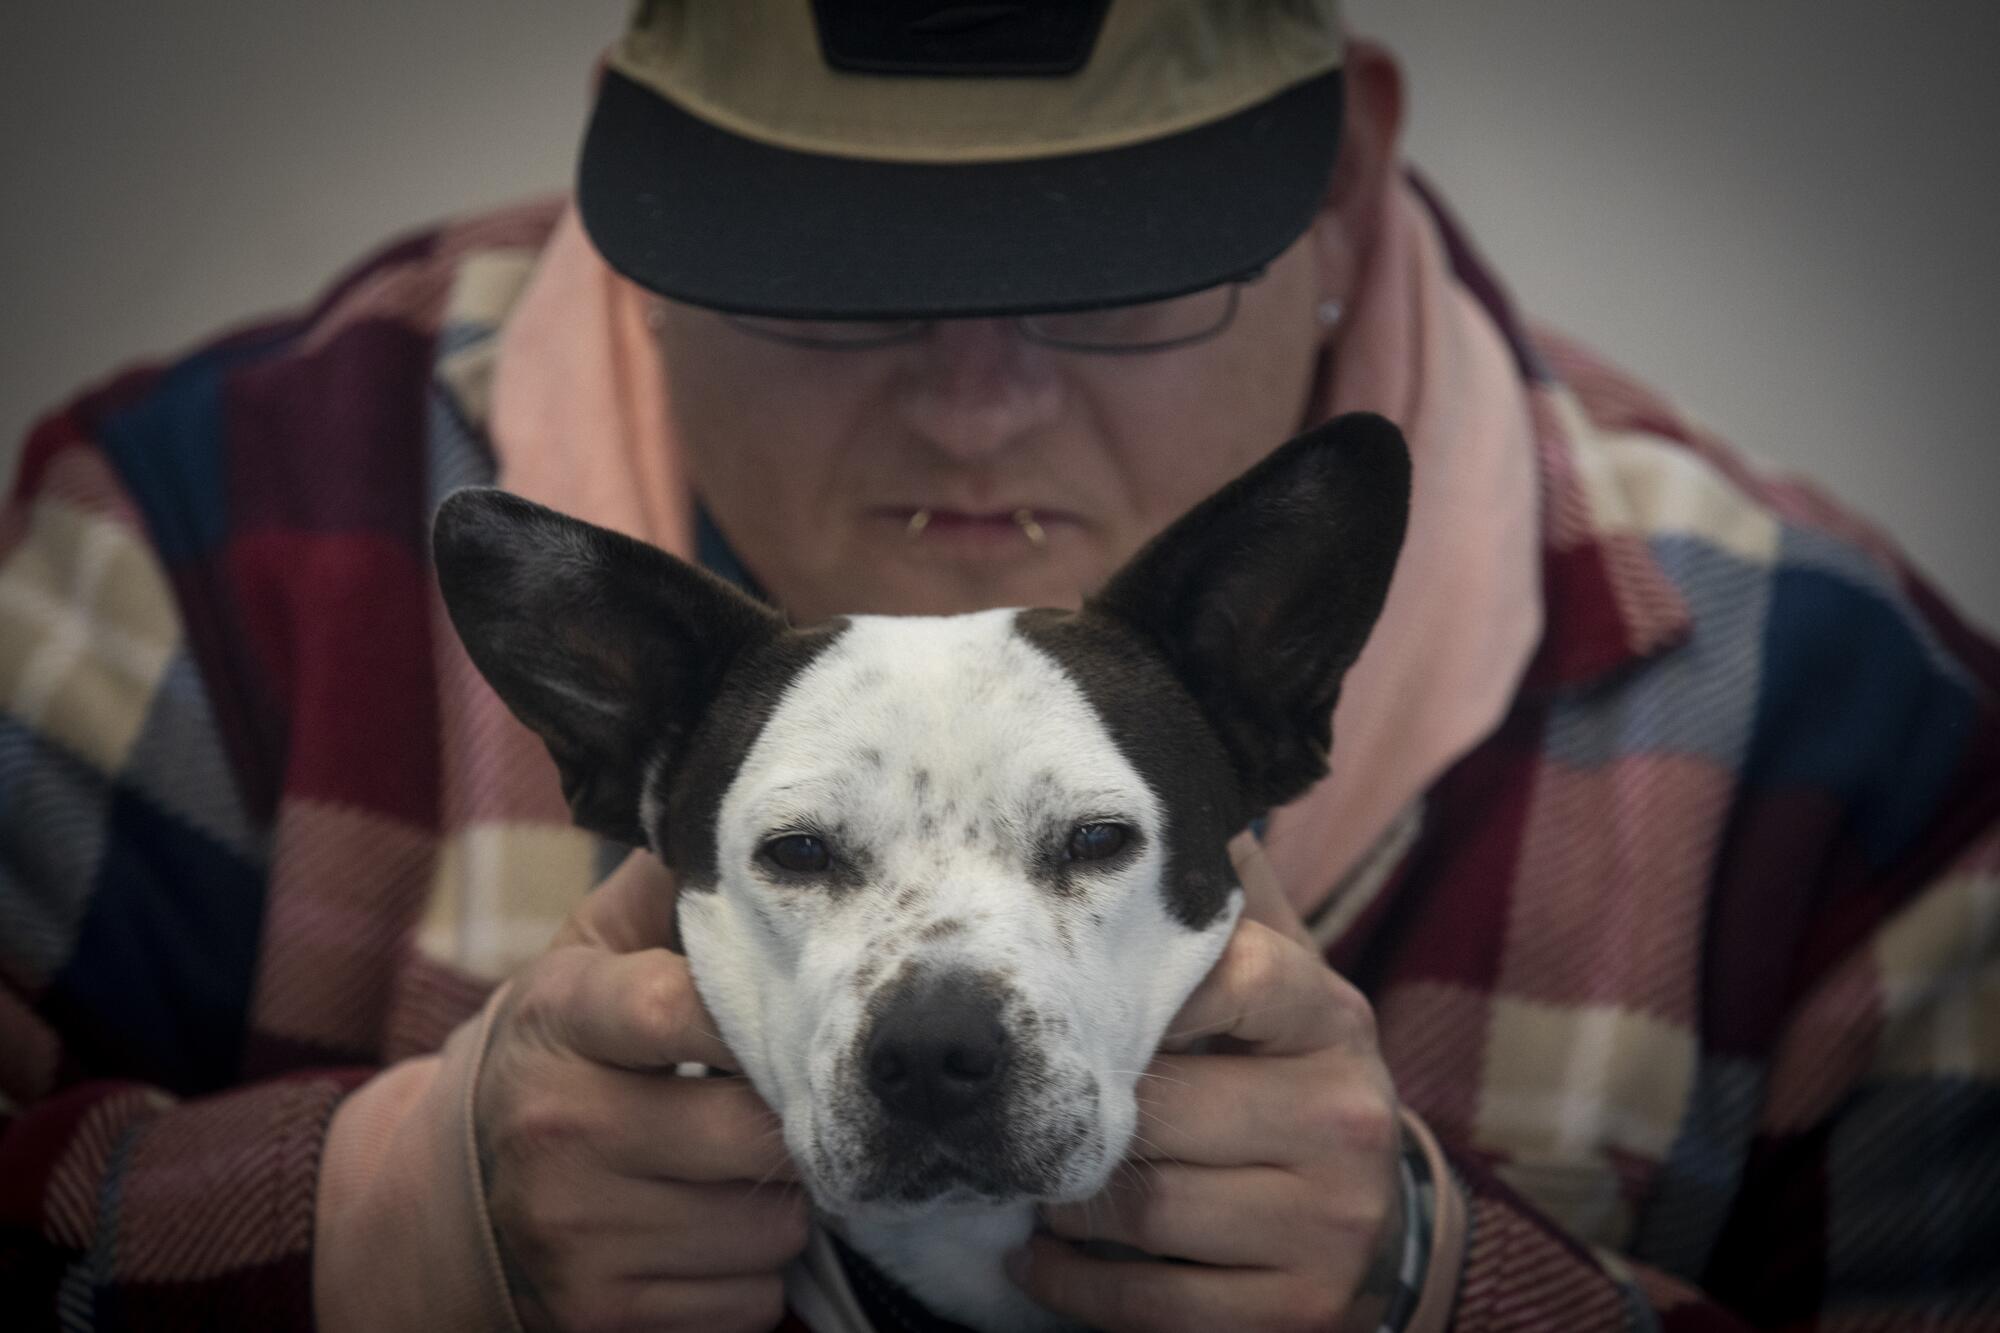 "I have to find a way to pay for her food," Seth Davis said of his support dog, Poppy.